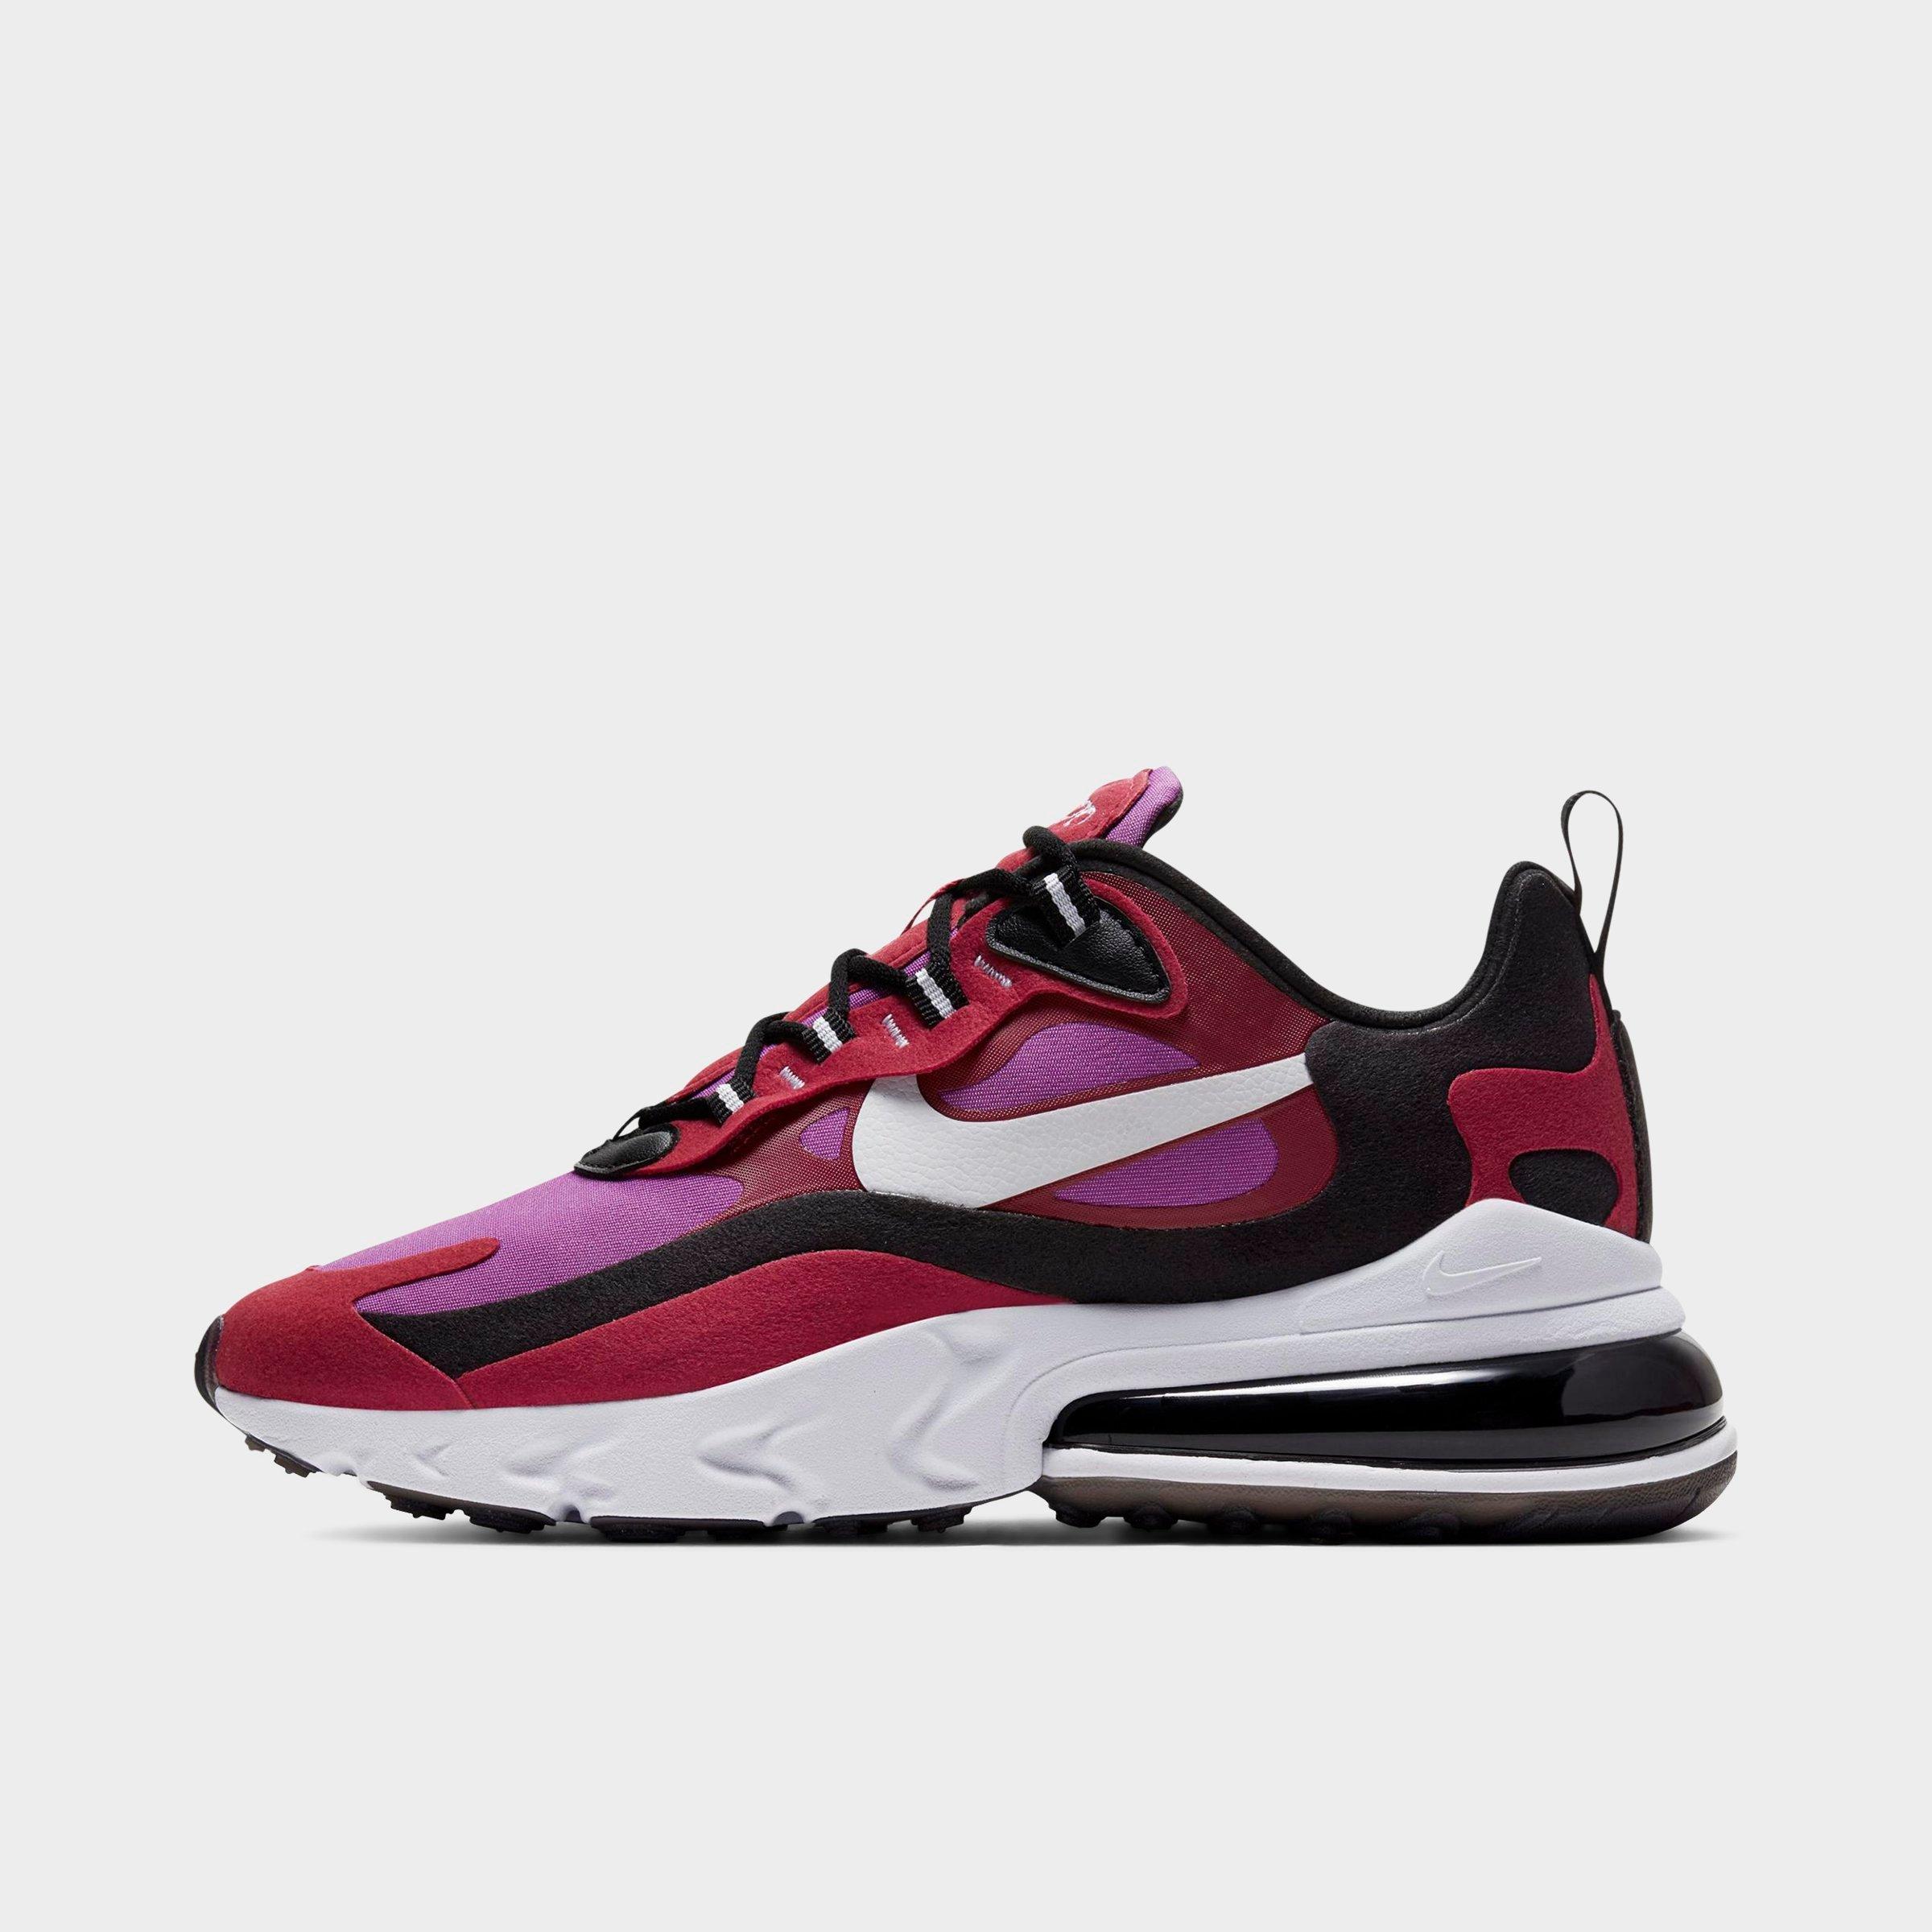 red and purple nike shoes